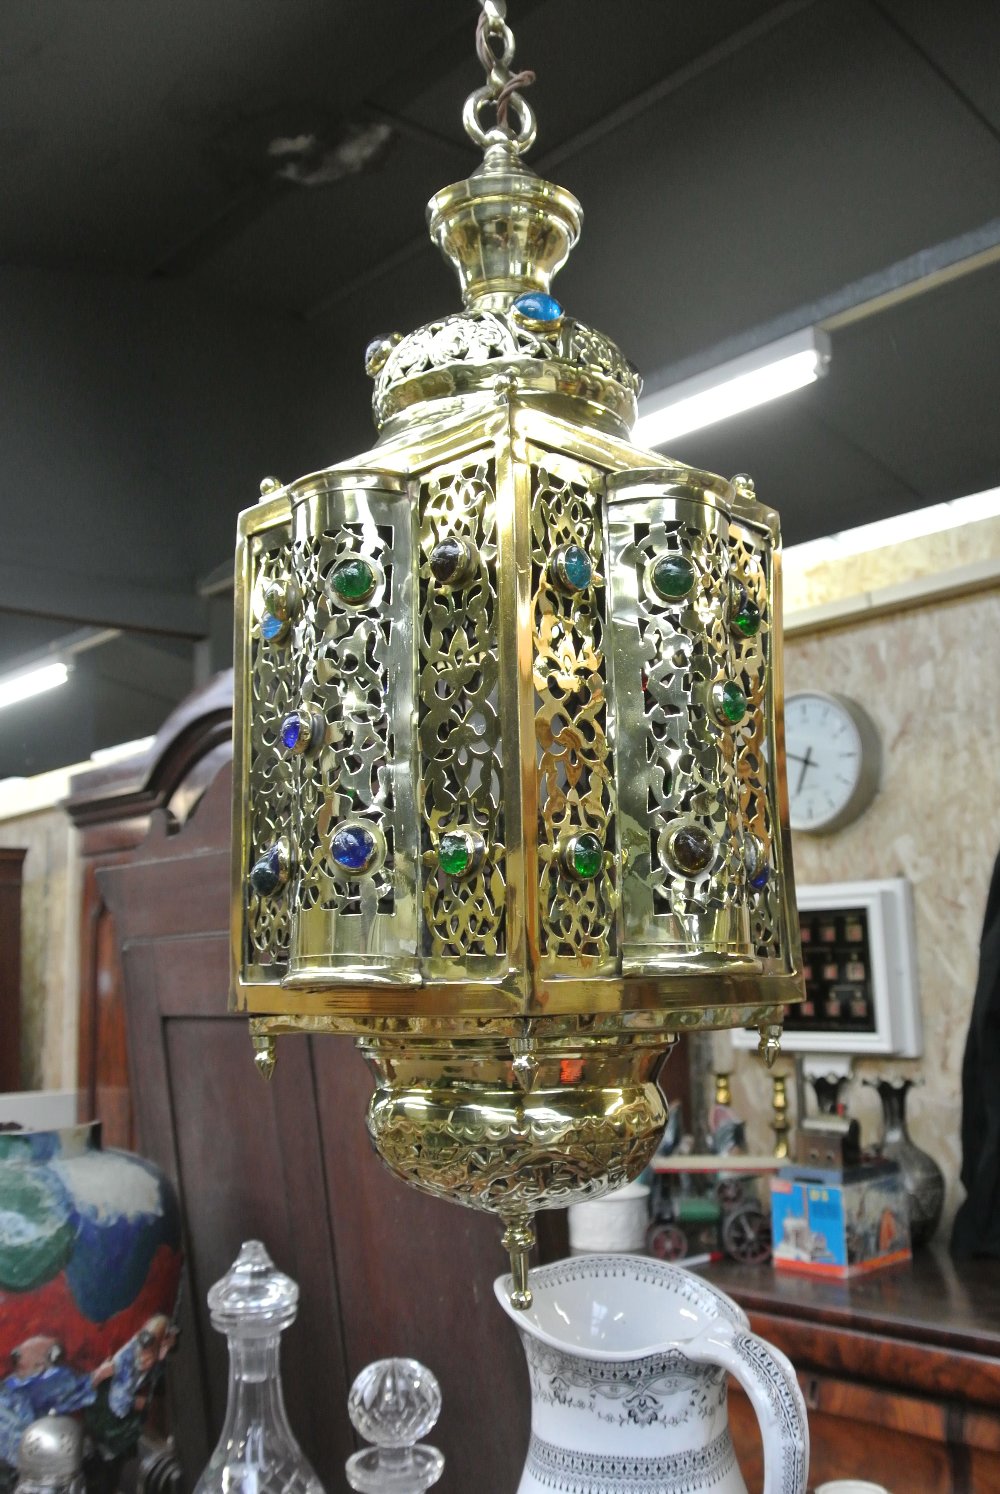 COLLECTABLES - A stunning antique Islamic brass la